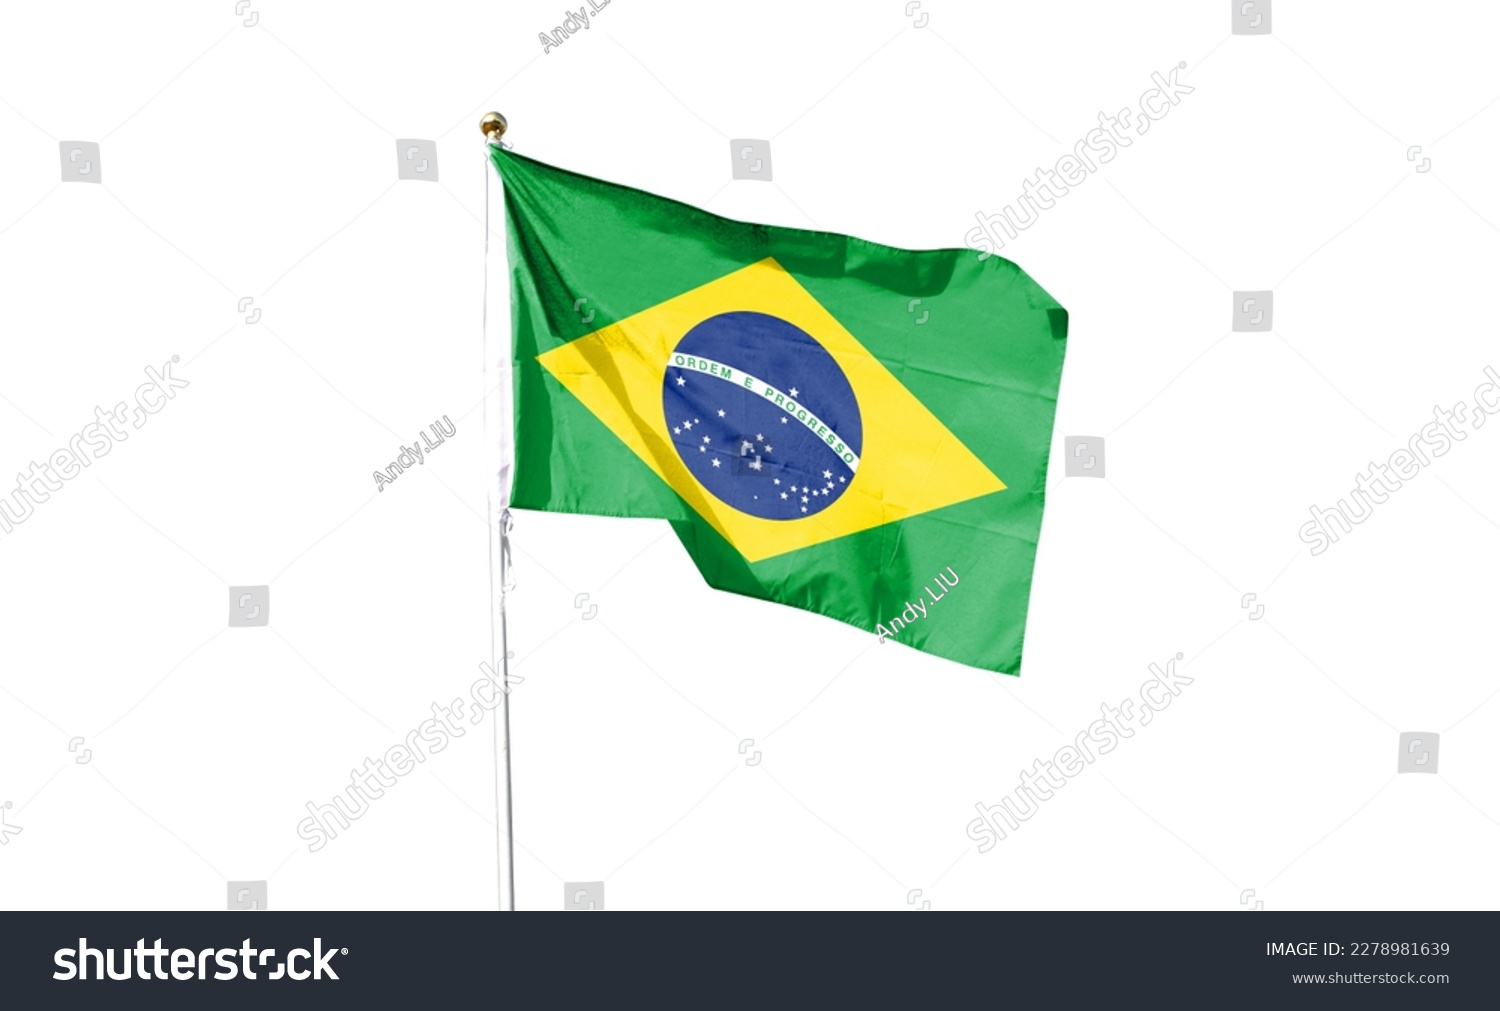 Brazilian flag in the cloudy sky. waving in the sky #2278981639